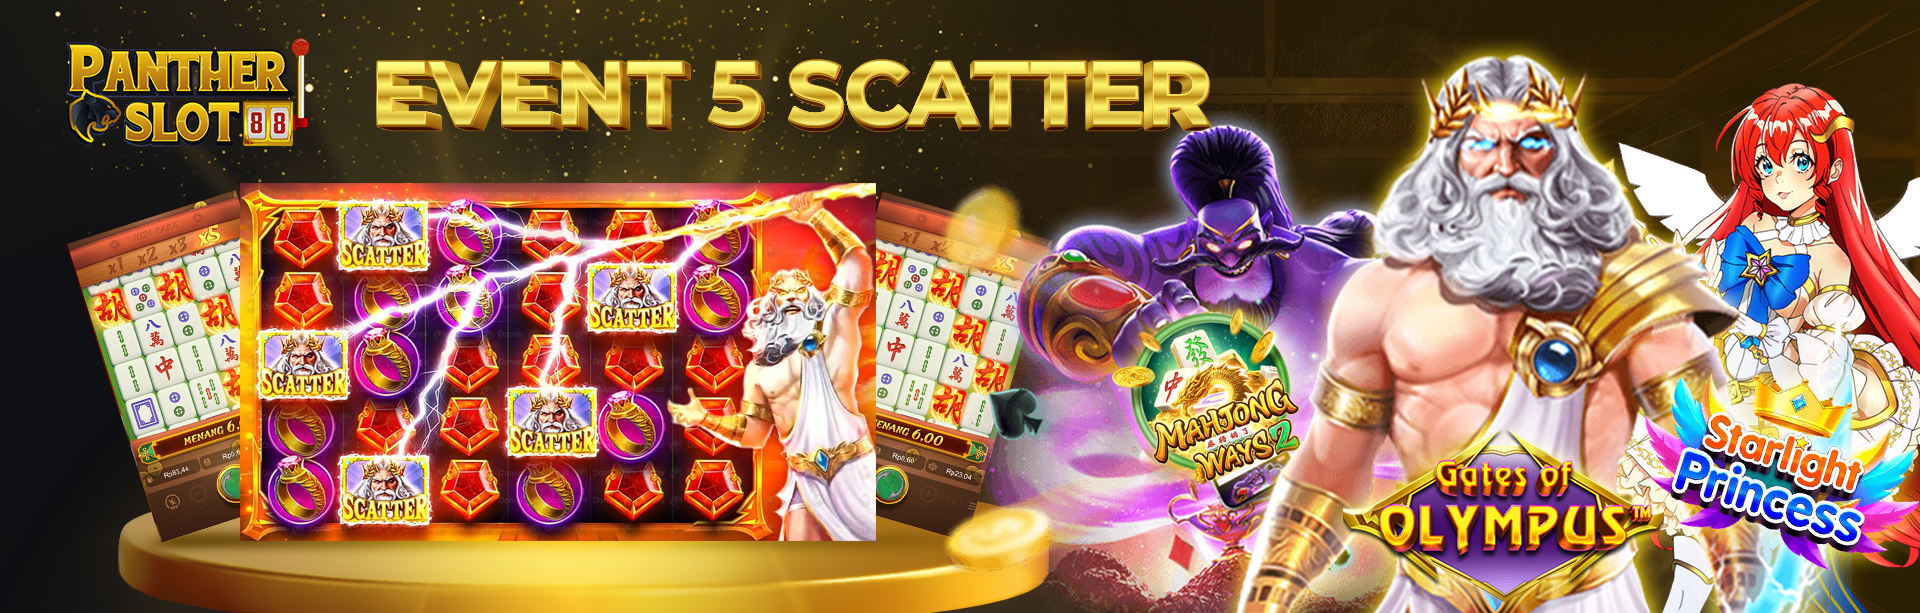 EVENT 5 SCATTER 